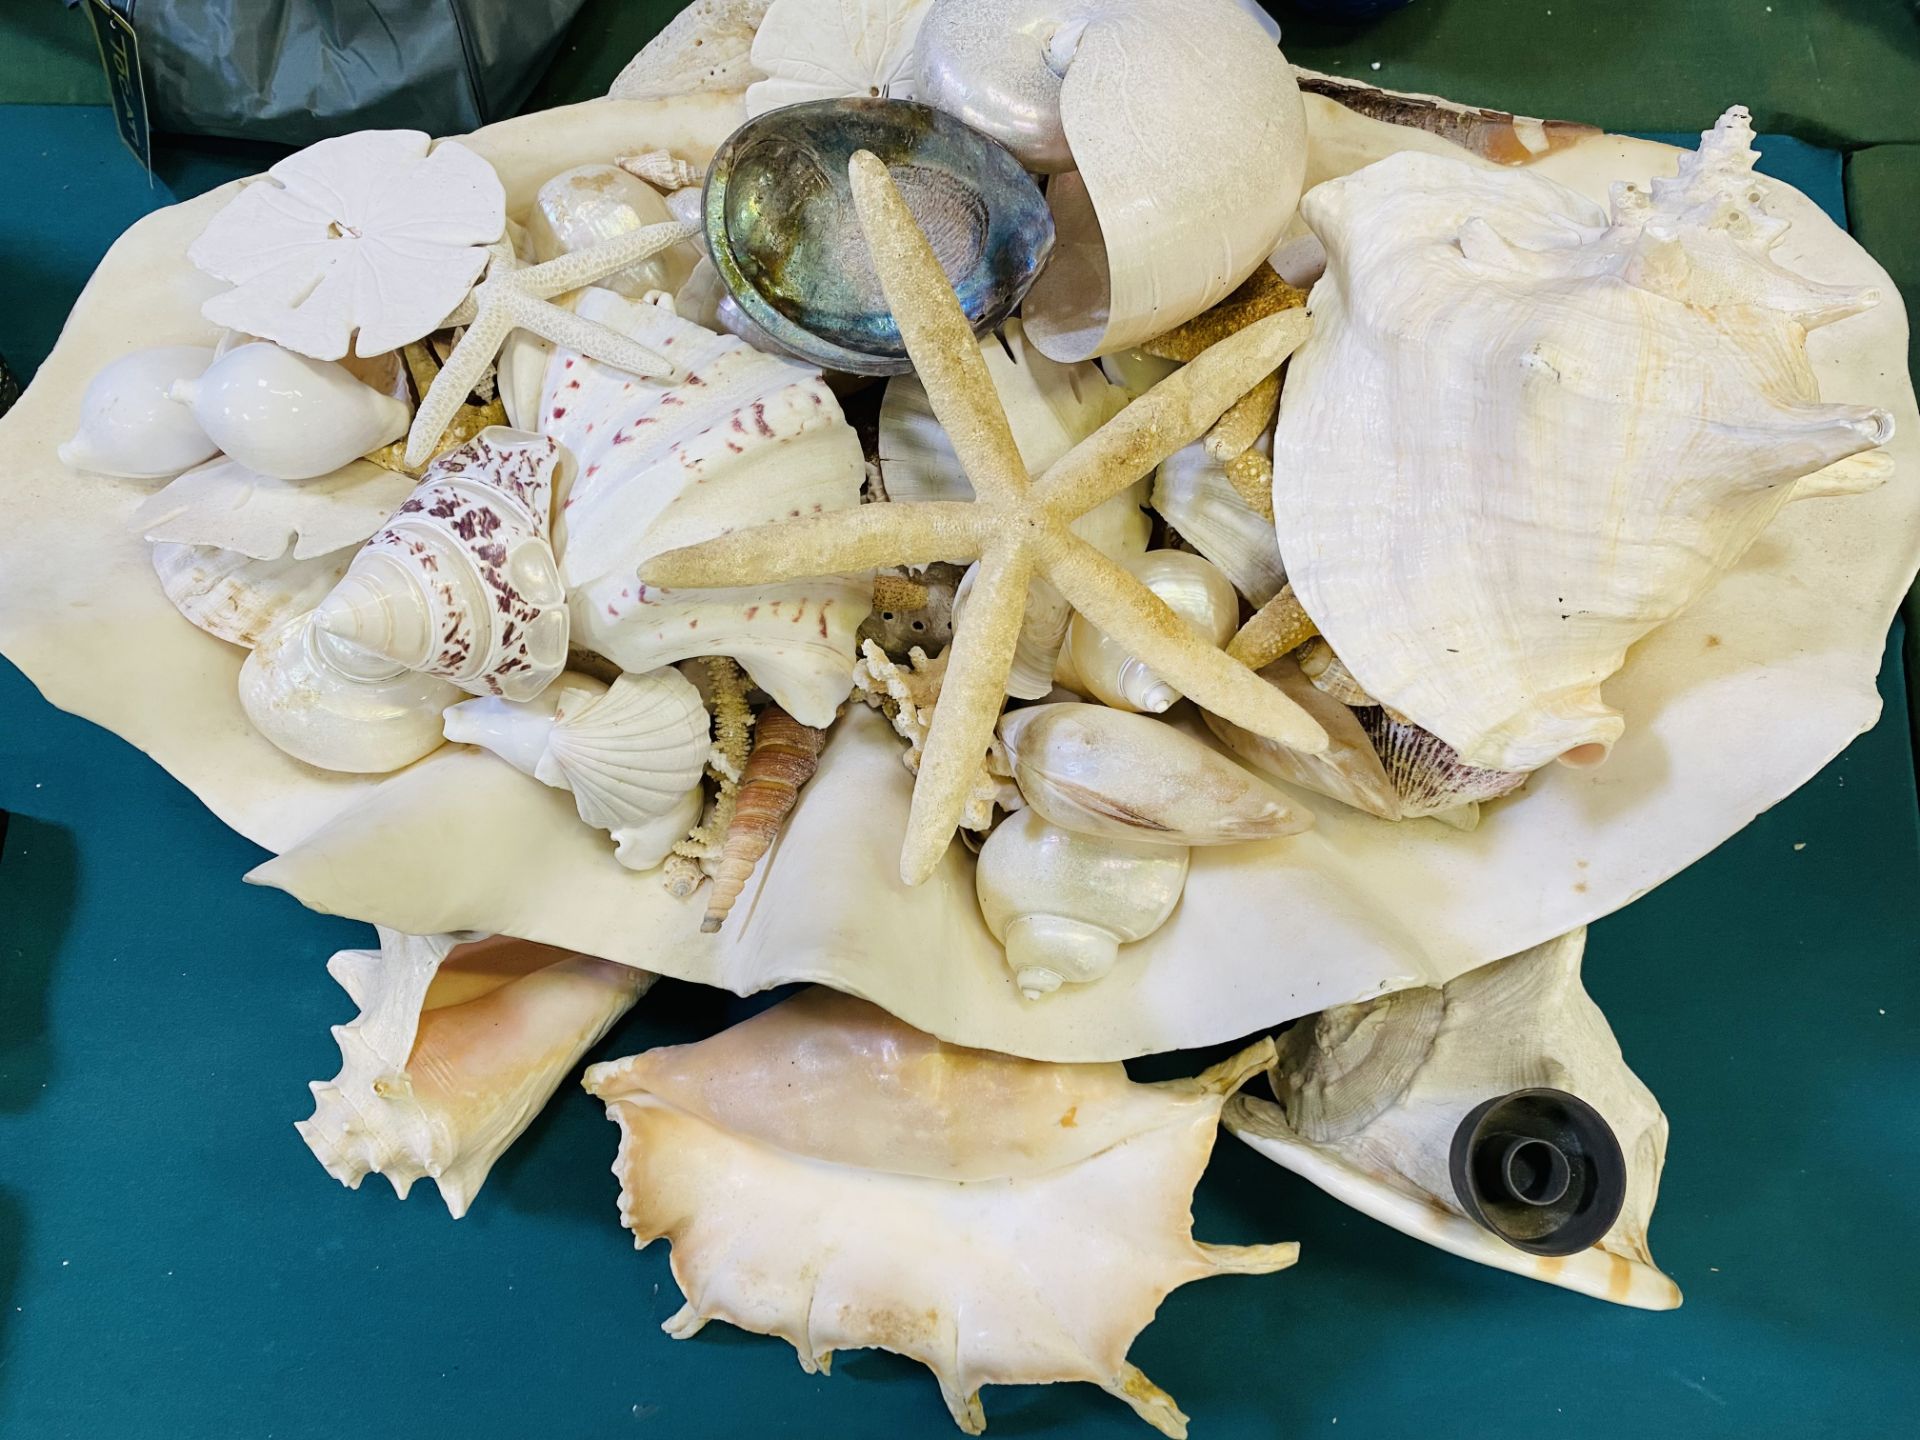 Large clam shell filled with shells - Image 2 of 4